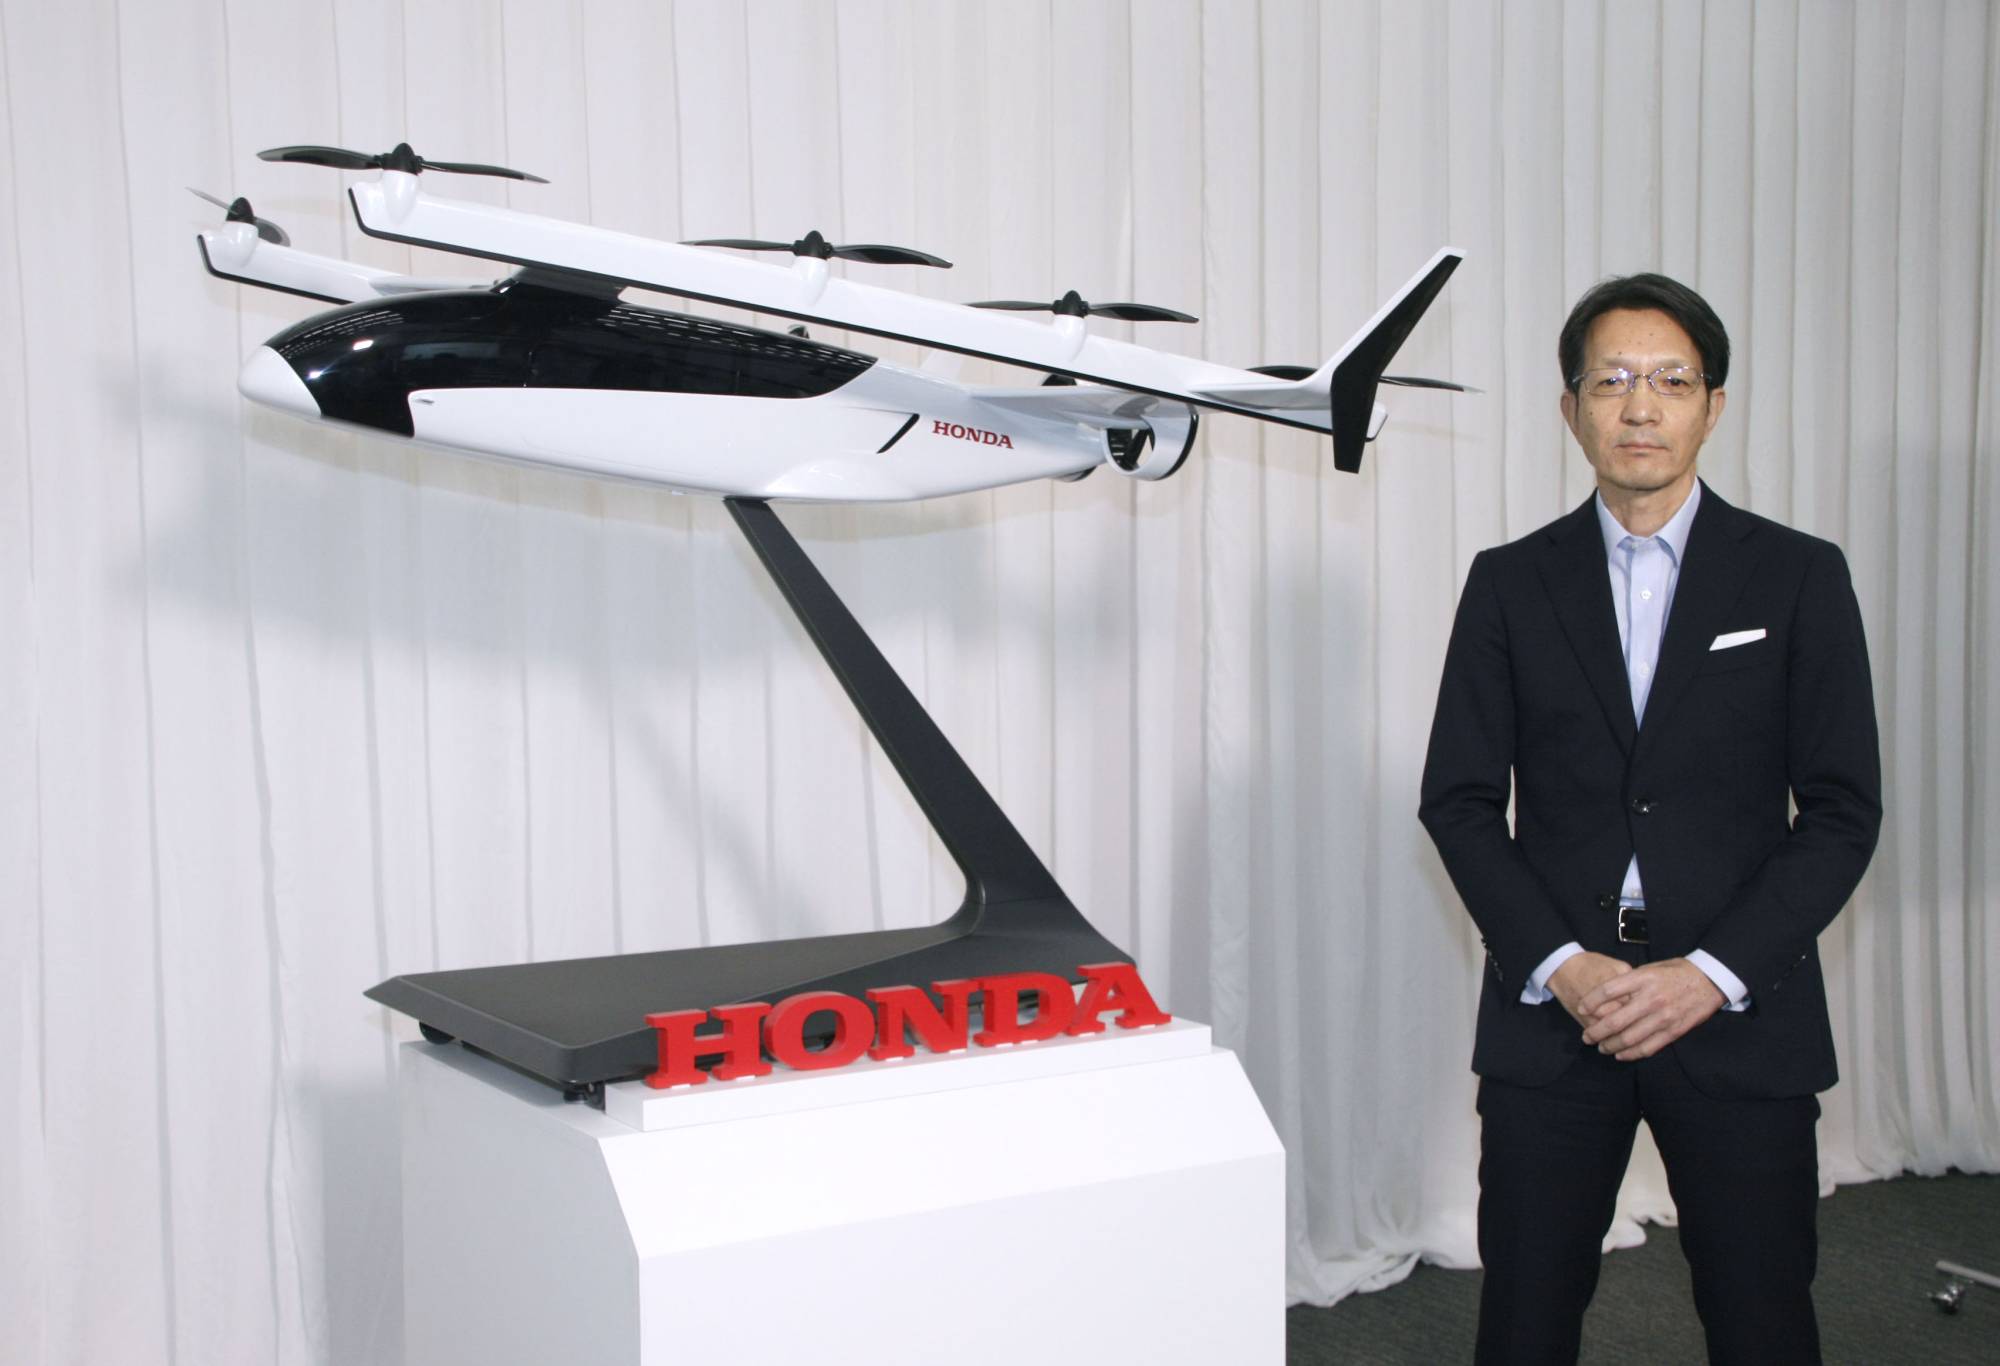 Honda R&D Co. President Keiji Otsu shows a model for the firm's electric vertical takeoff and landing (eVTOL) vehicles in Wako, Saitama Prefecture, on Tuesday. | KYODO